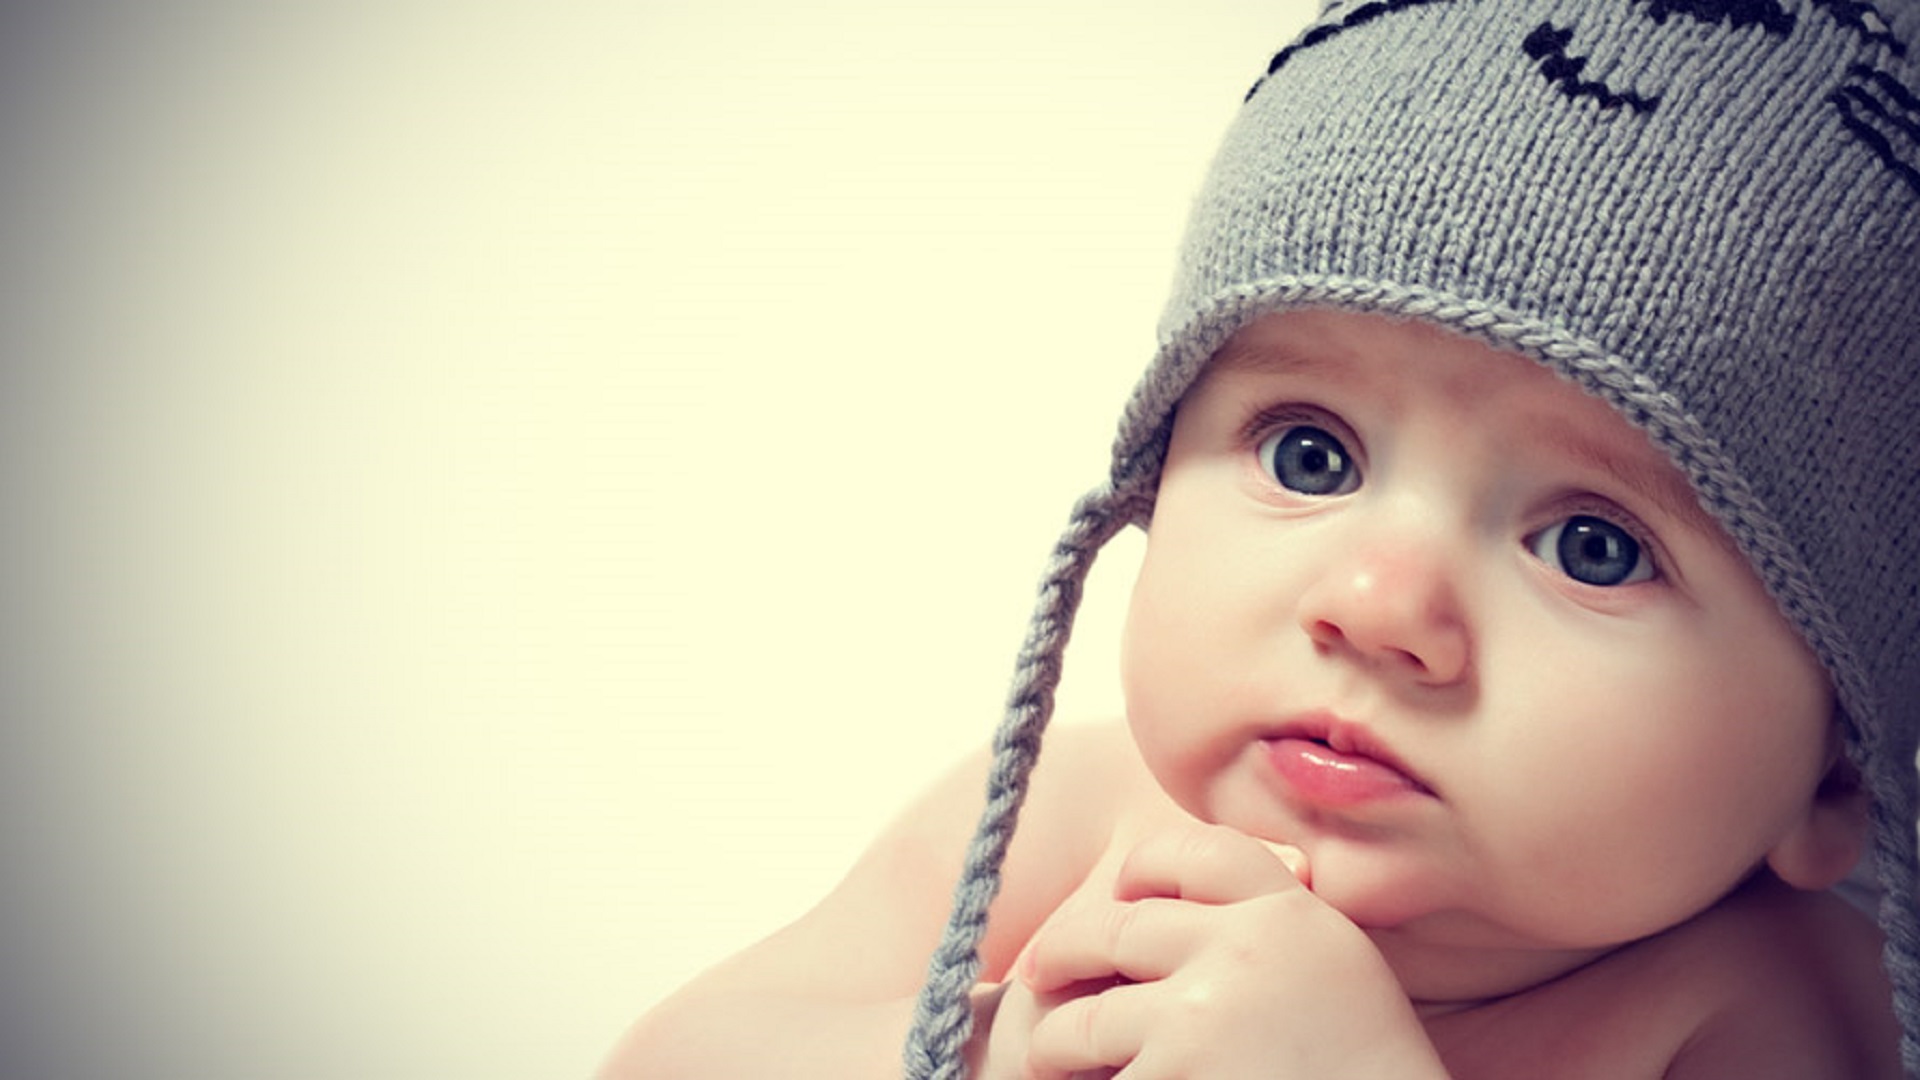 30 Cute Baby Pictures And Wallpapers   Style Arena